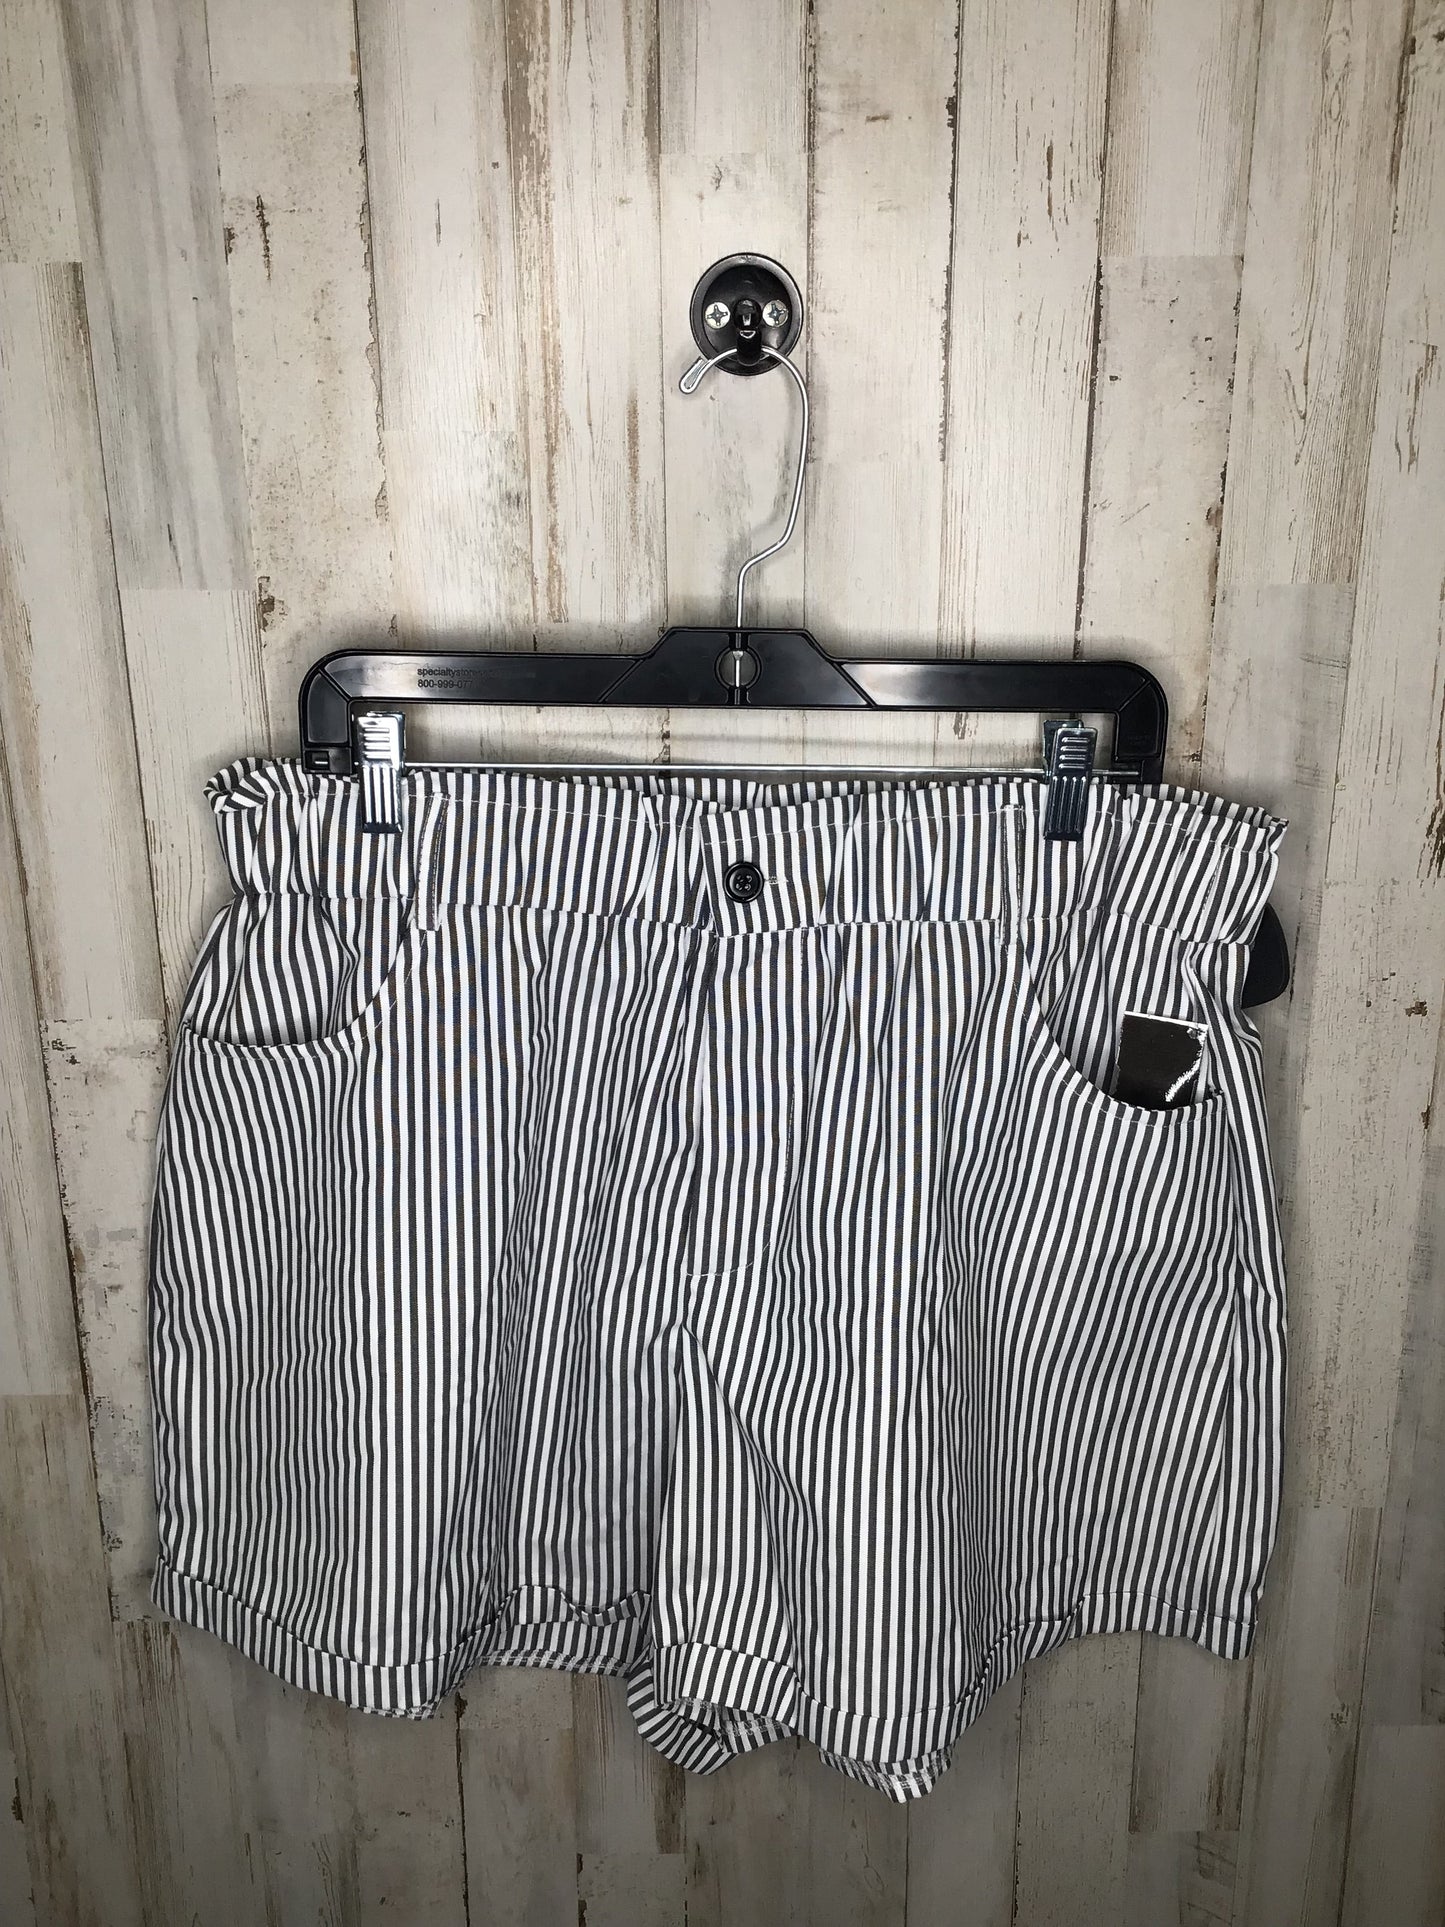 Striped Pattern Shorts Clothes Mentor, Size 2x